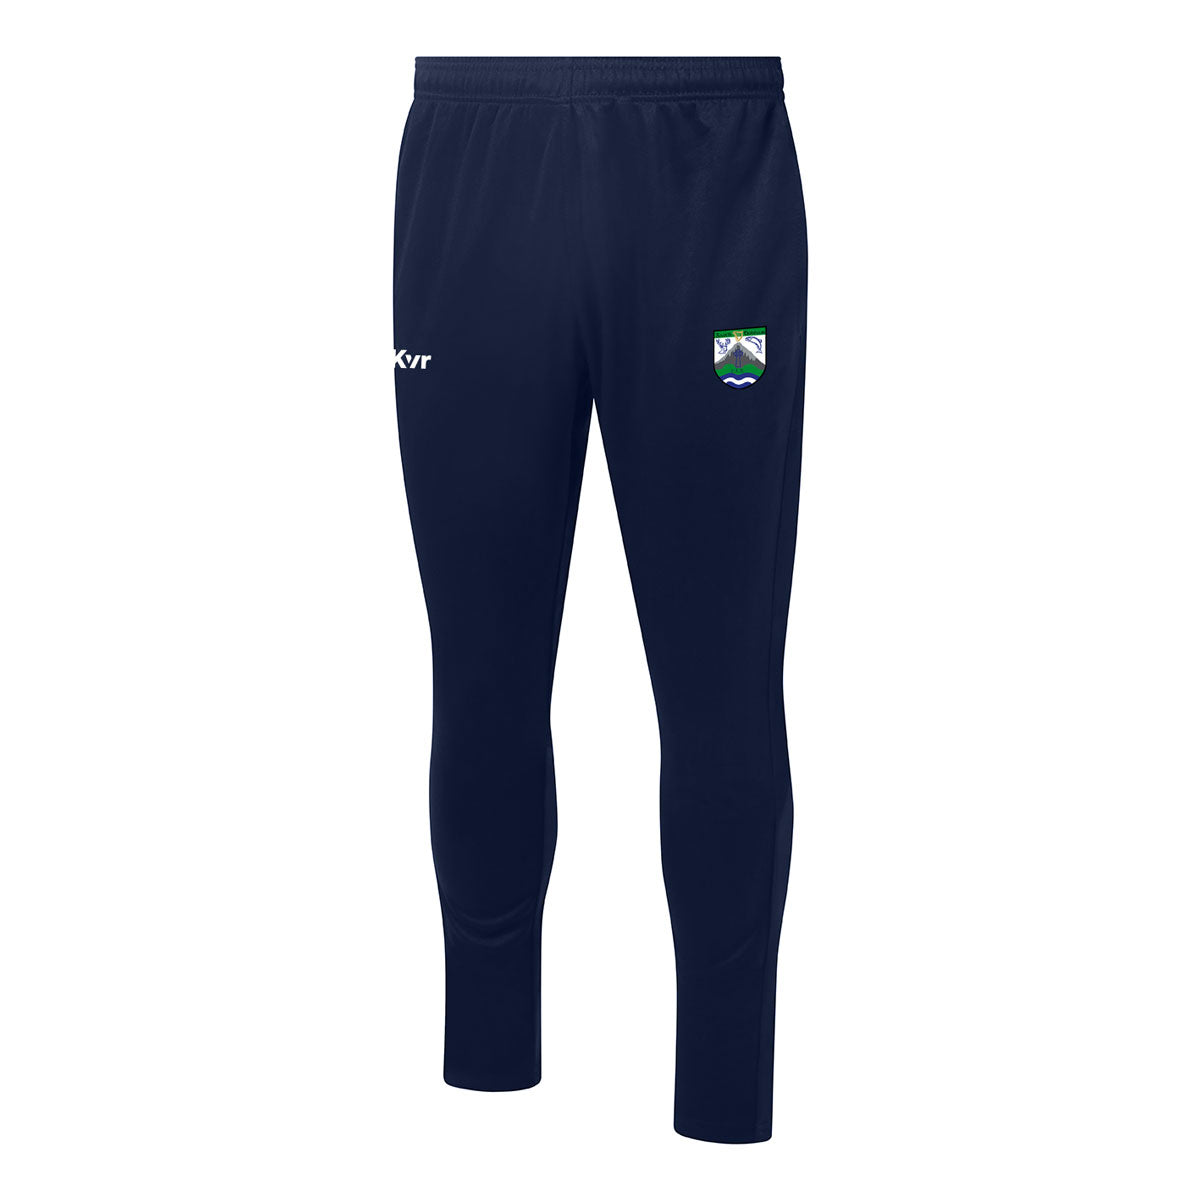 Mc Keever CLG Ghaoth Dobhair Core 22 Skinny Pants - Adult - Navy